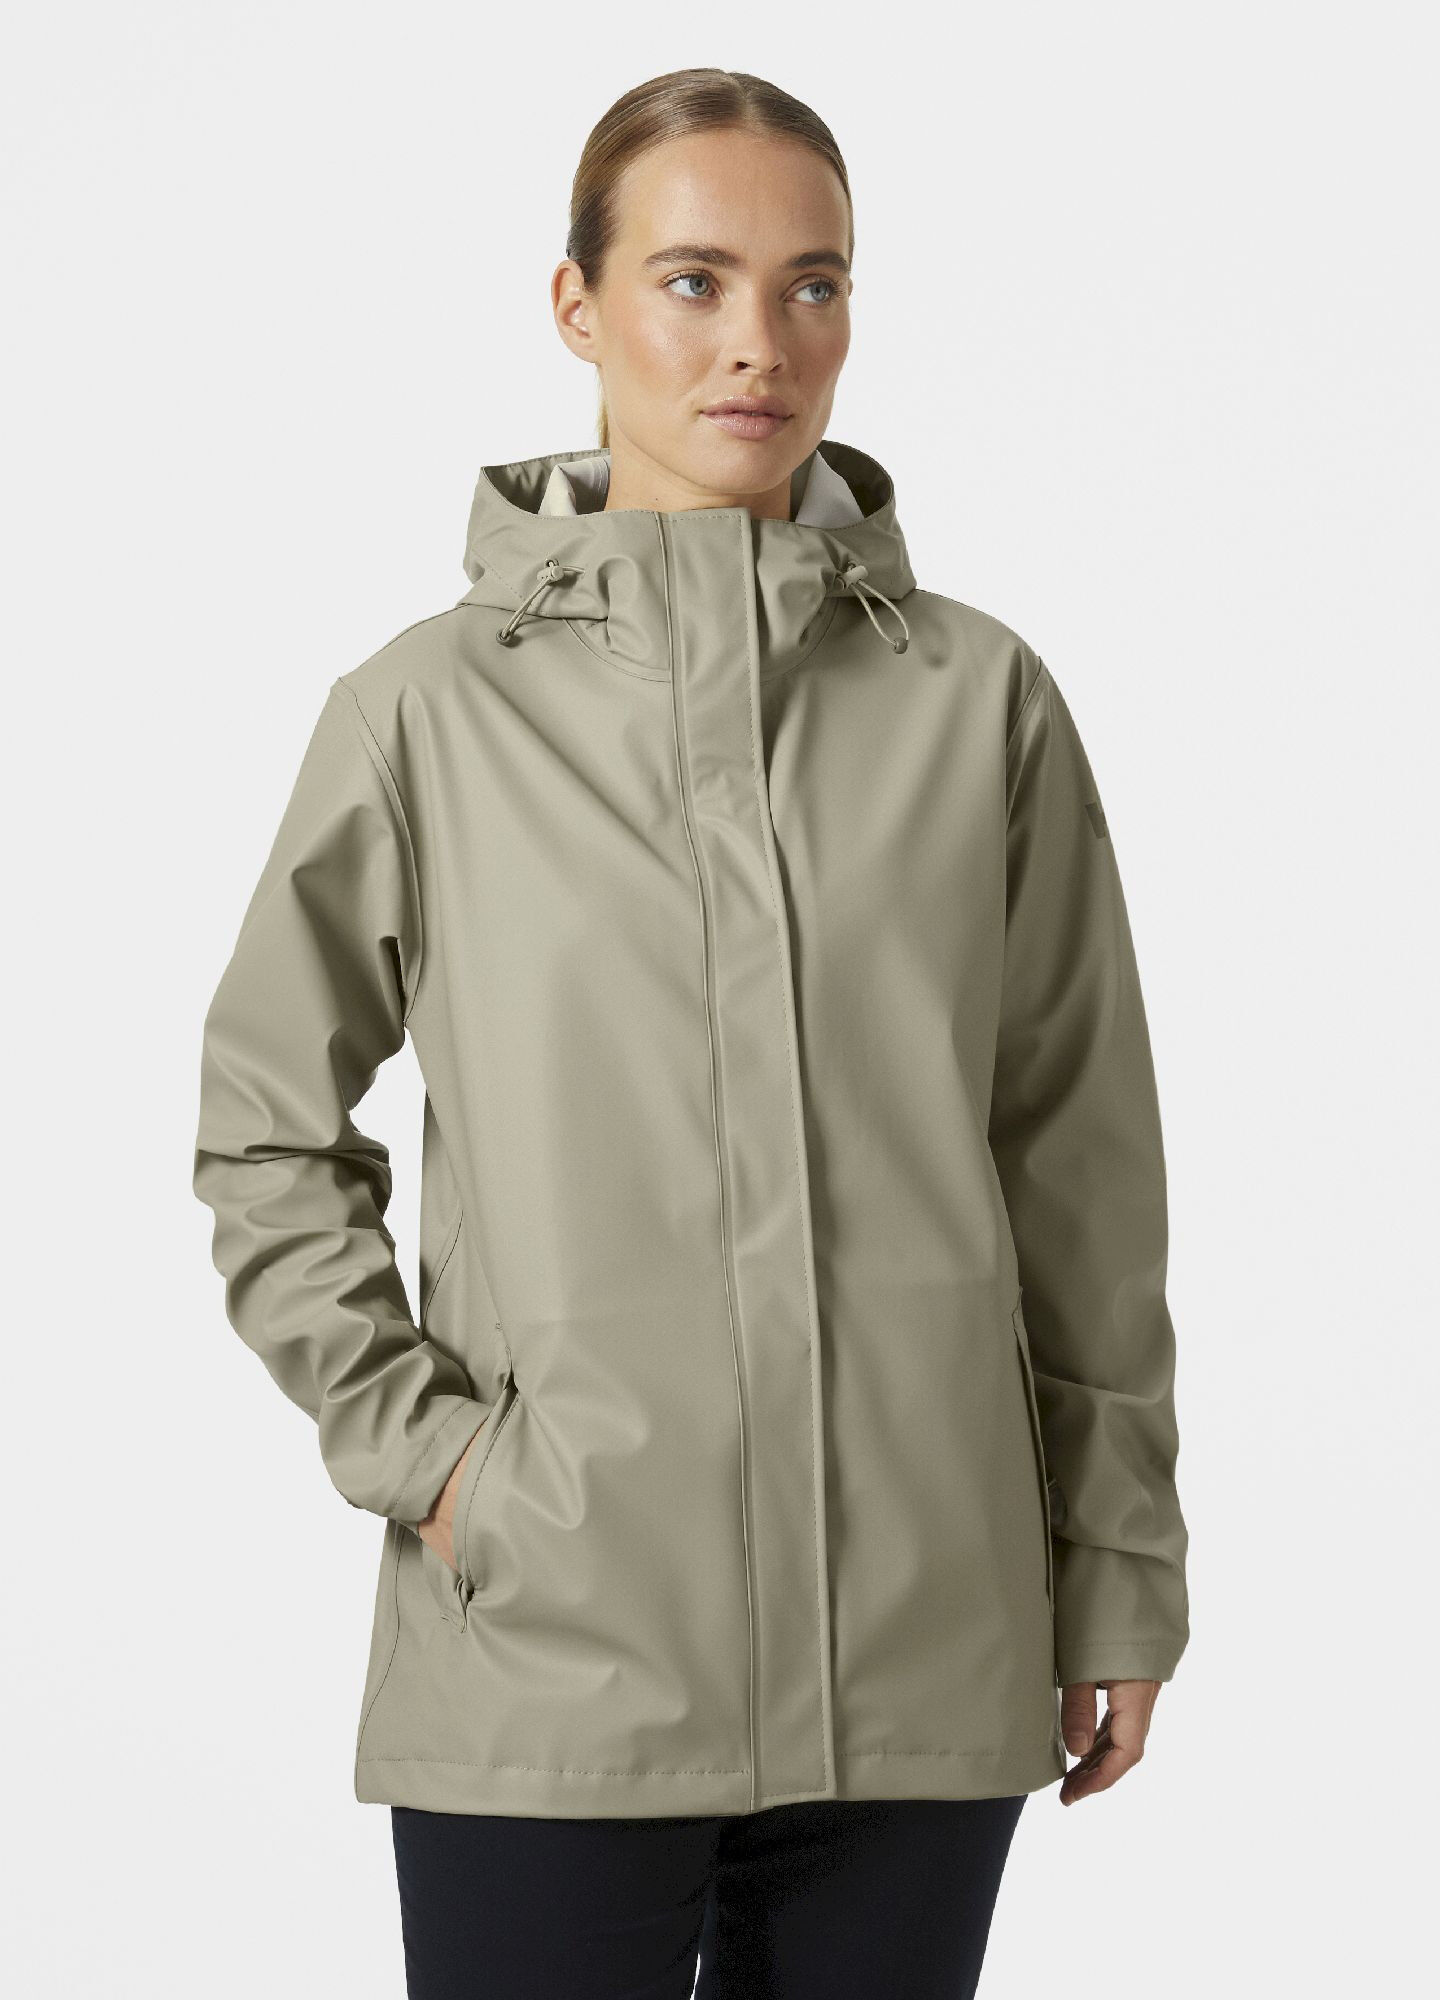 Helly Hansen Moss Jacket - Chaqueta impermeable - Mujer